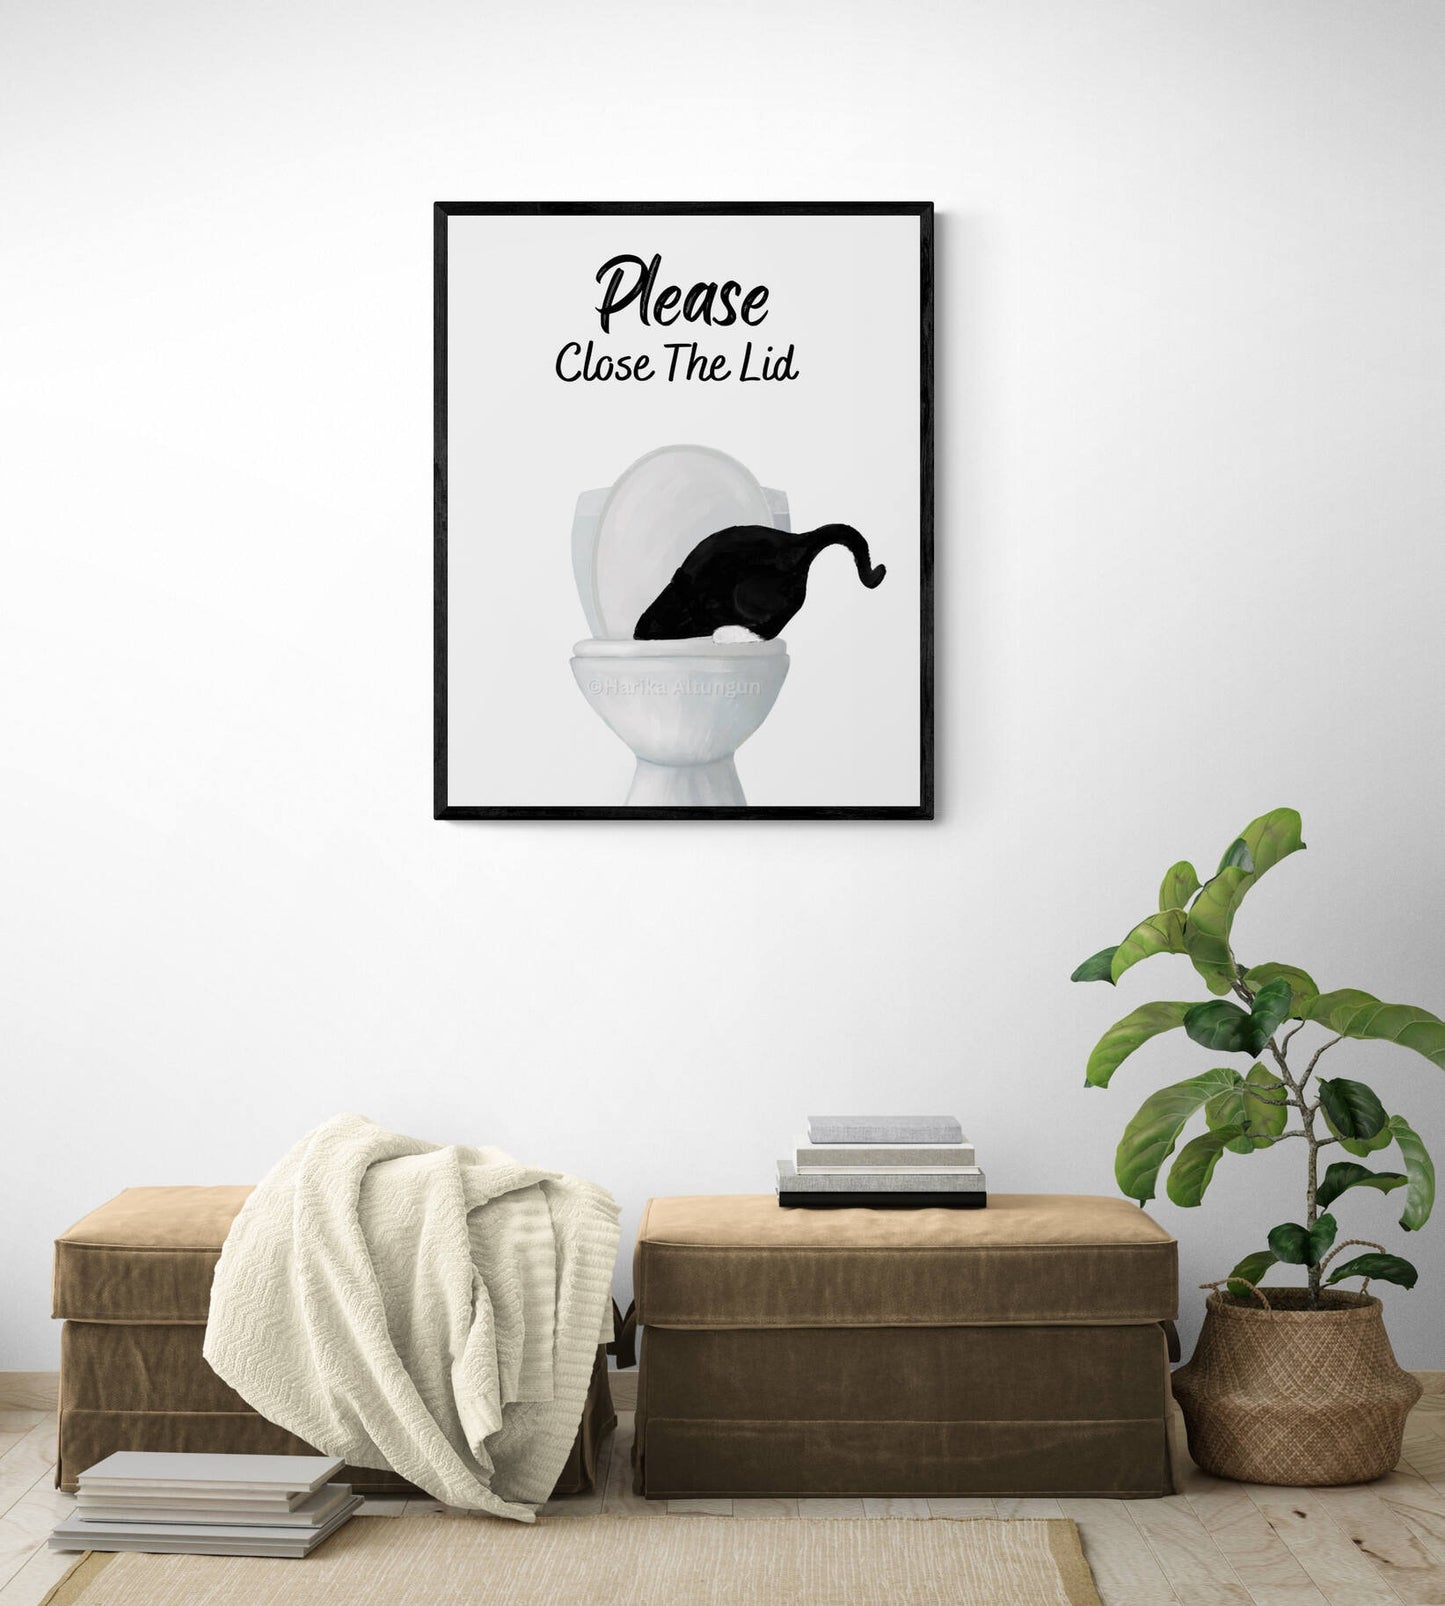 Tuxedo Cat Drinking Water From Toilet Sign, Cute Tuxedo Cat Print, Bathroom Decor, Cat Painting, Kitty Licking Water From Toilet Art